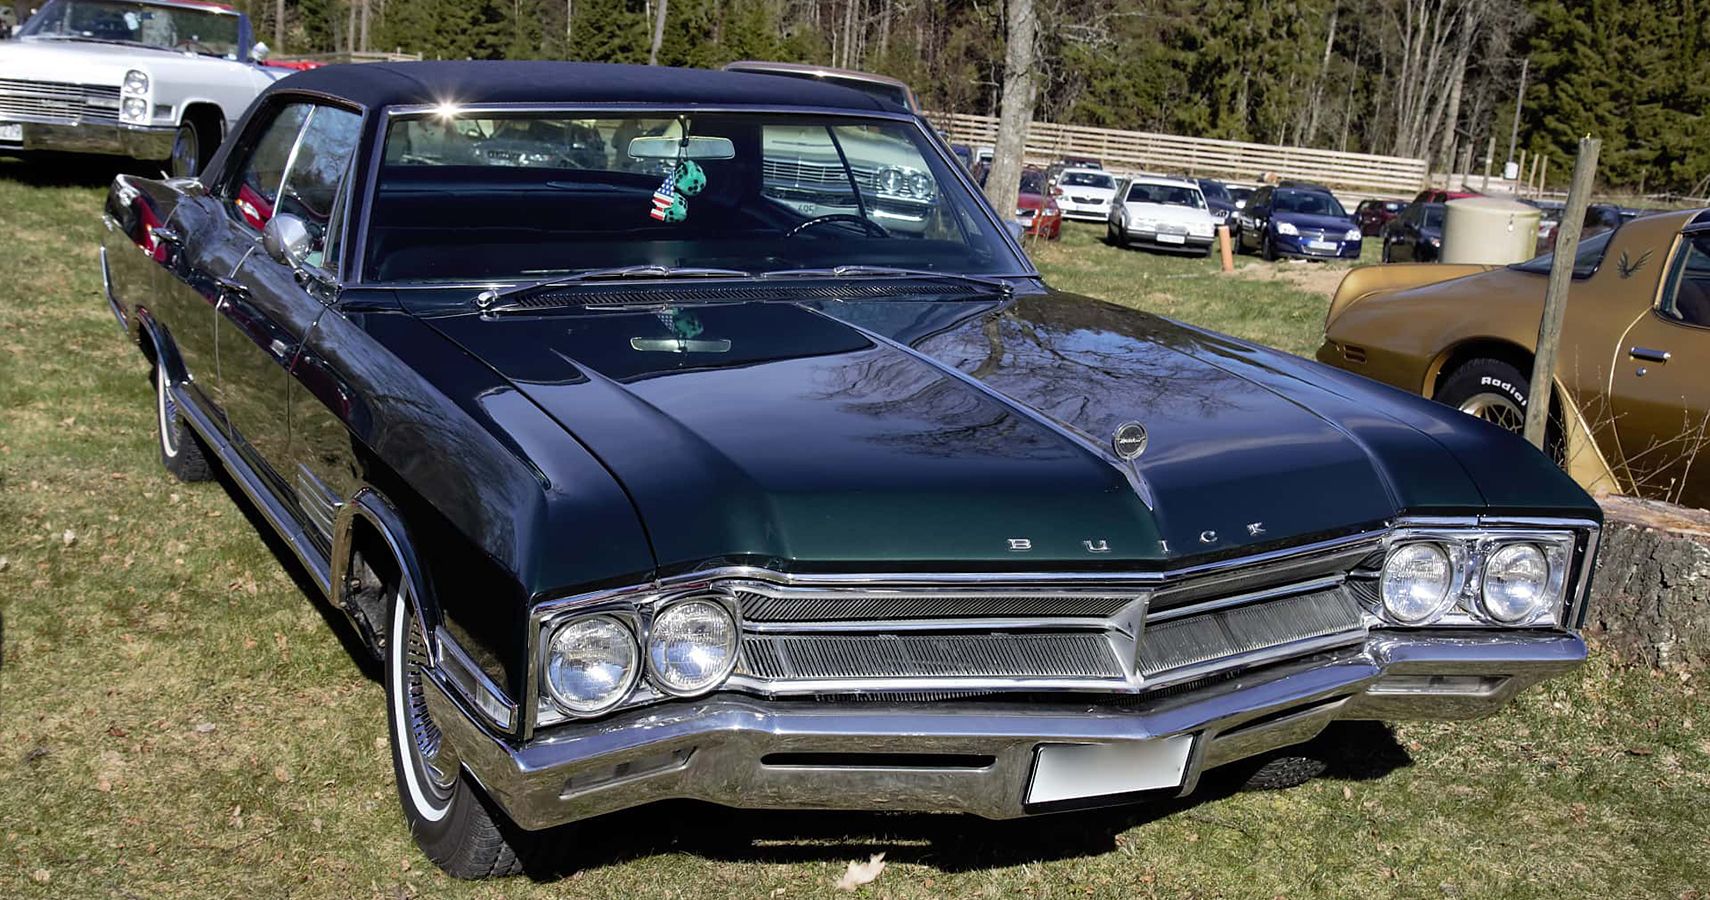 10 Things You Need To Know Before Collecting The 1966 Buick Wildcat